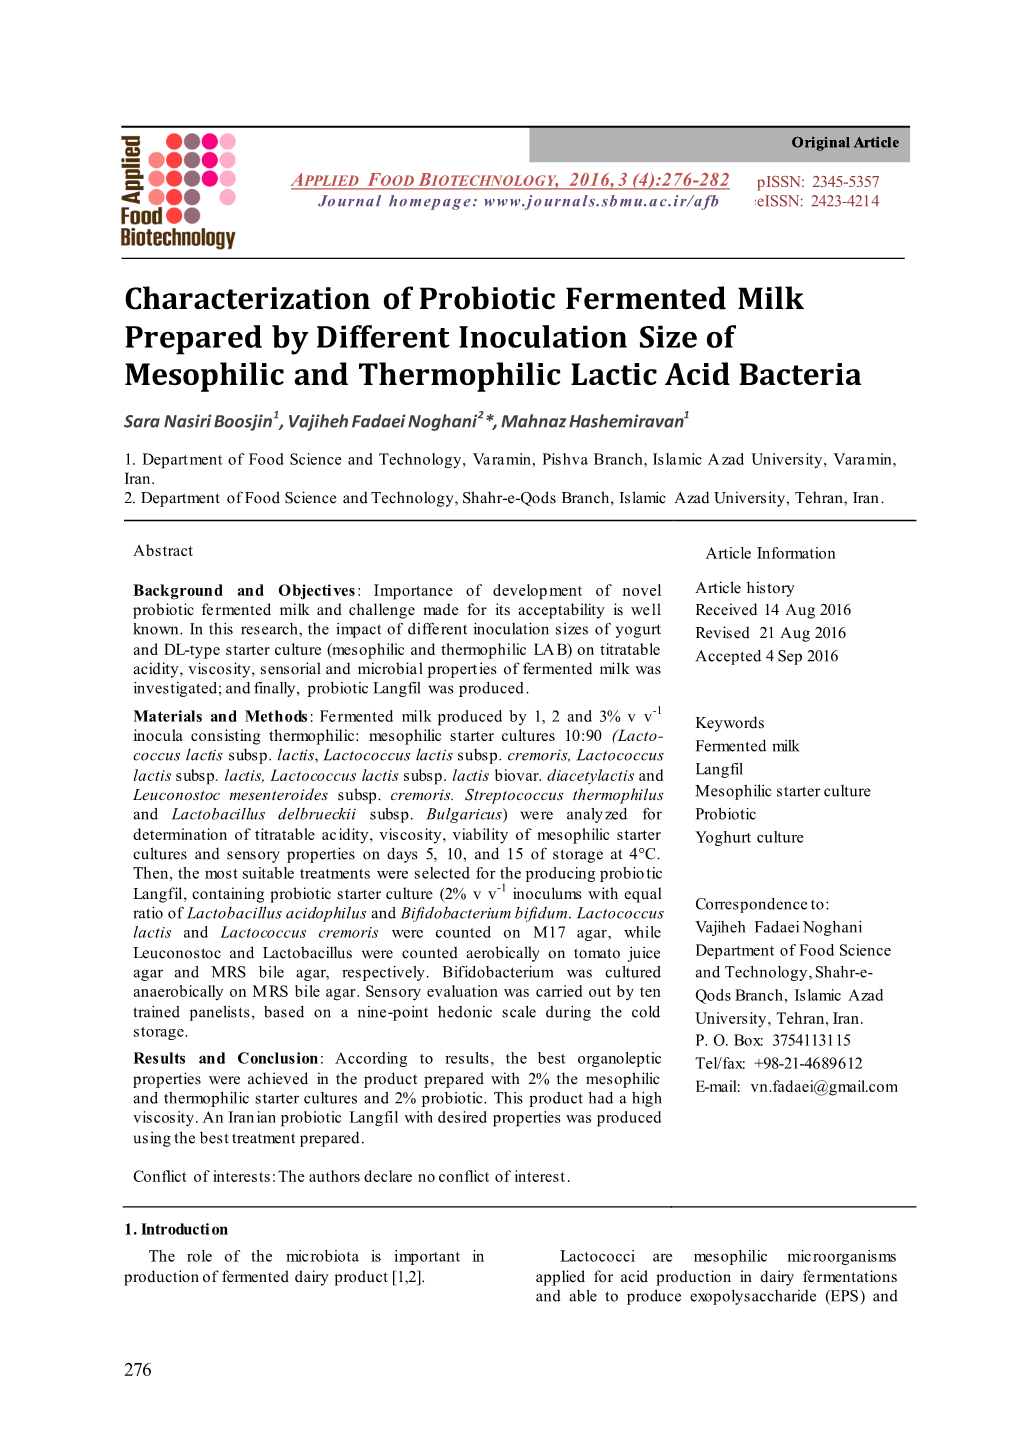 Characterization of Probiotic Fermented Milk Prepared by Different Inoculation Size of Mesophilic and Thermophilic Lactic Acid Bacteria